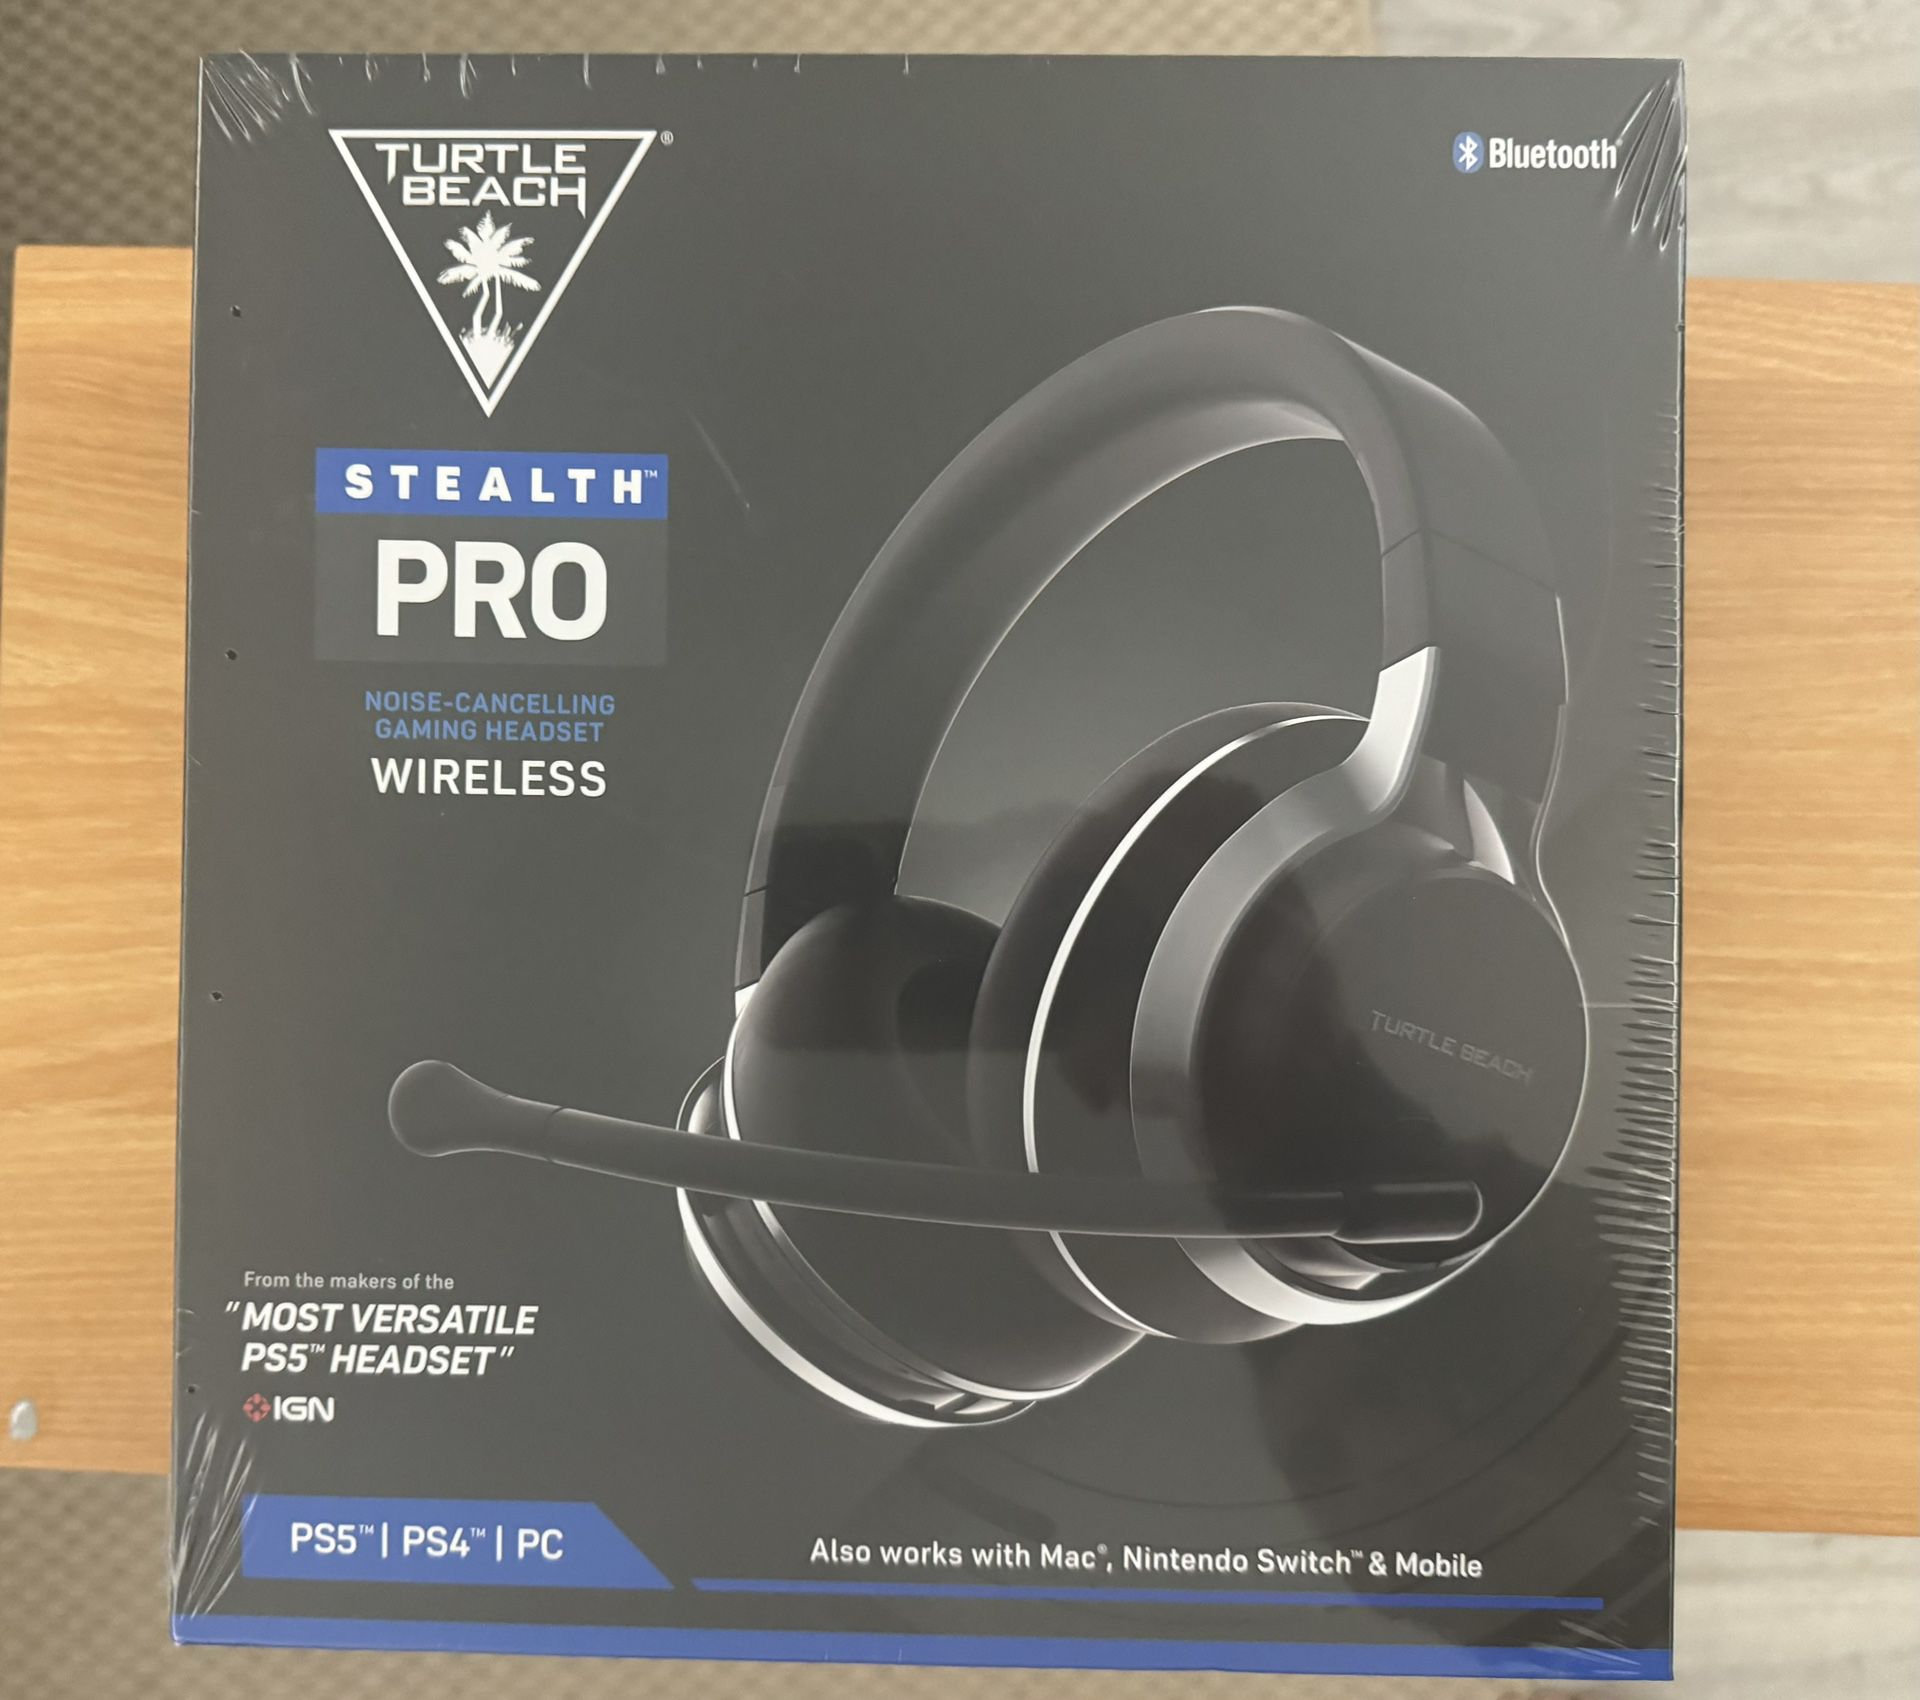 Turtle Beach Stealth Pro Wireless Headset -PS5/PS4/PC - Black